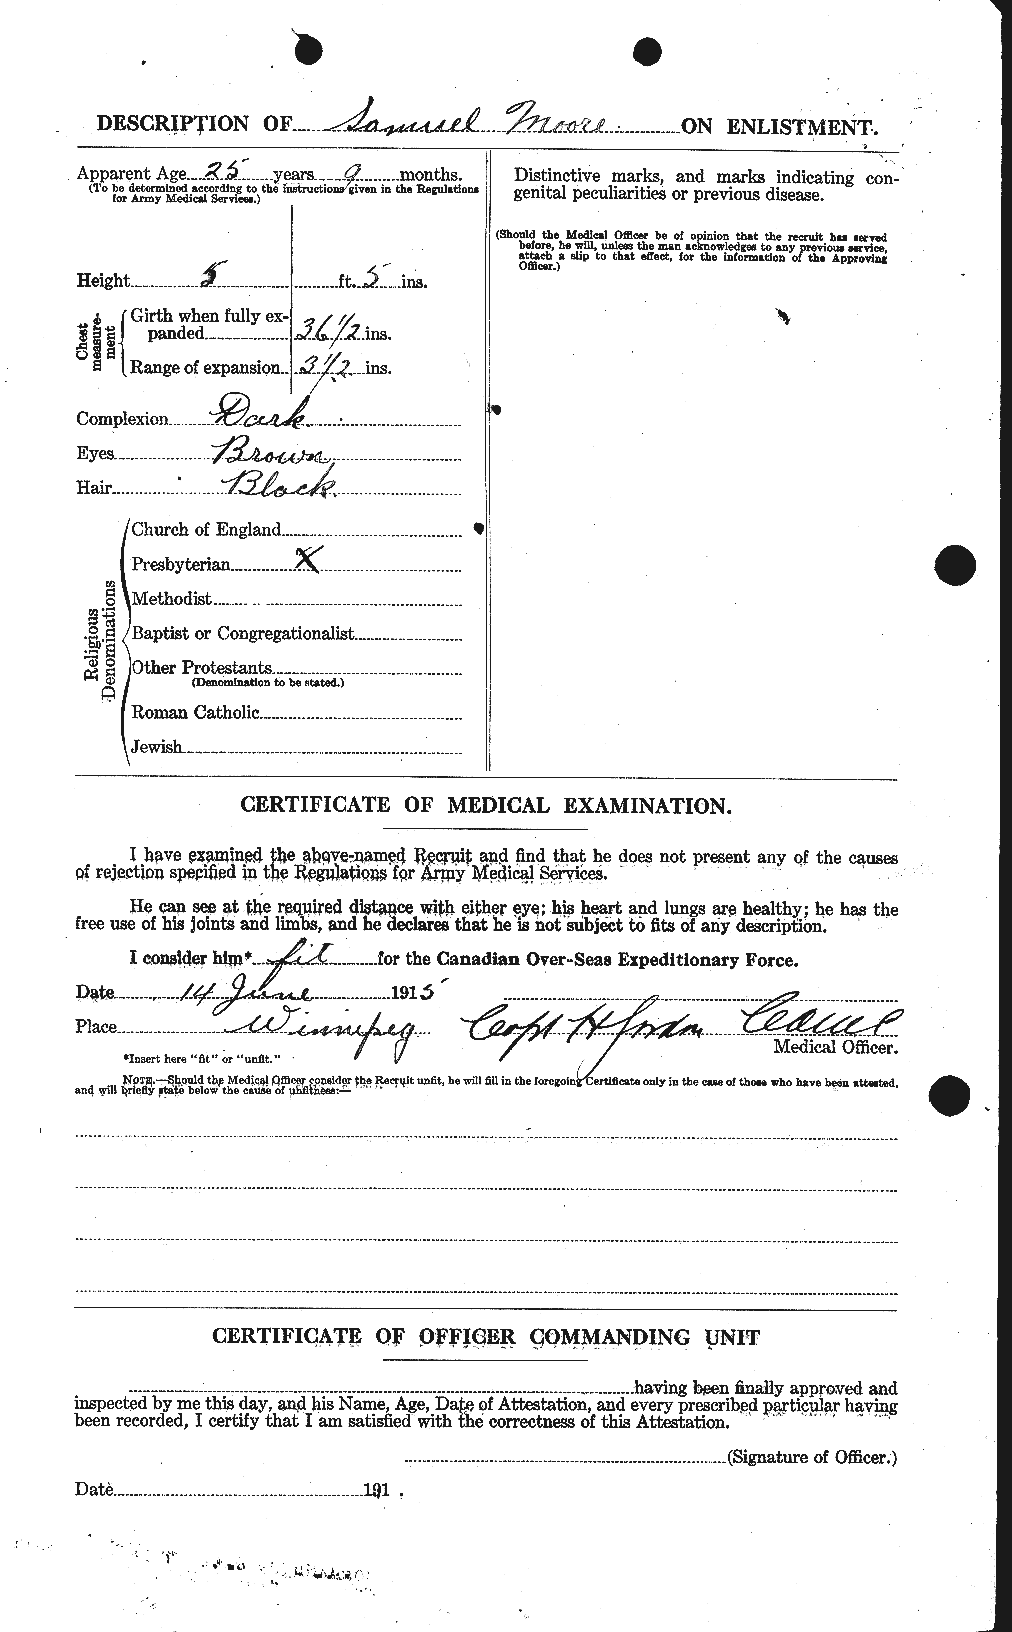 Personnel Records of the First World War - CEF 505560b